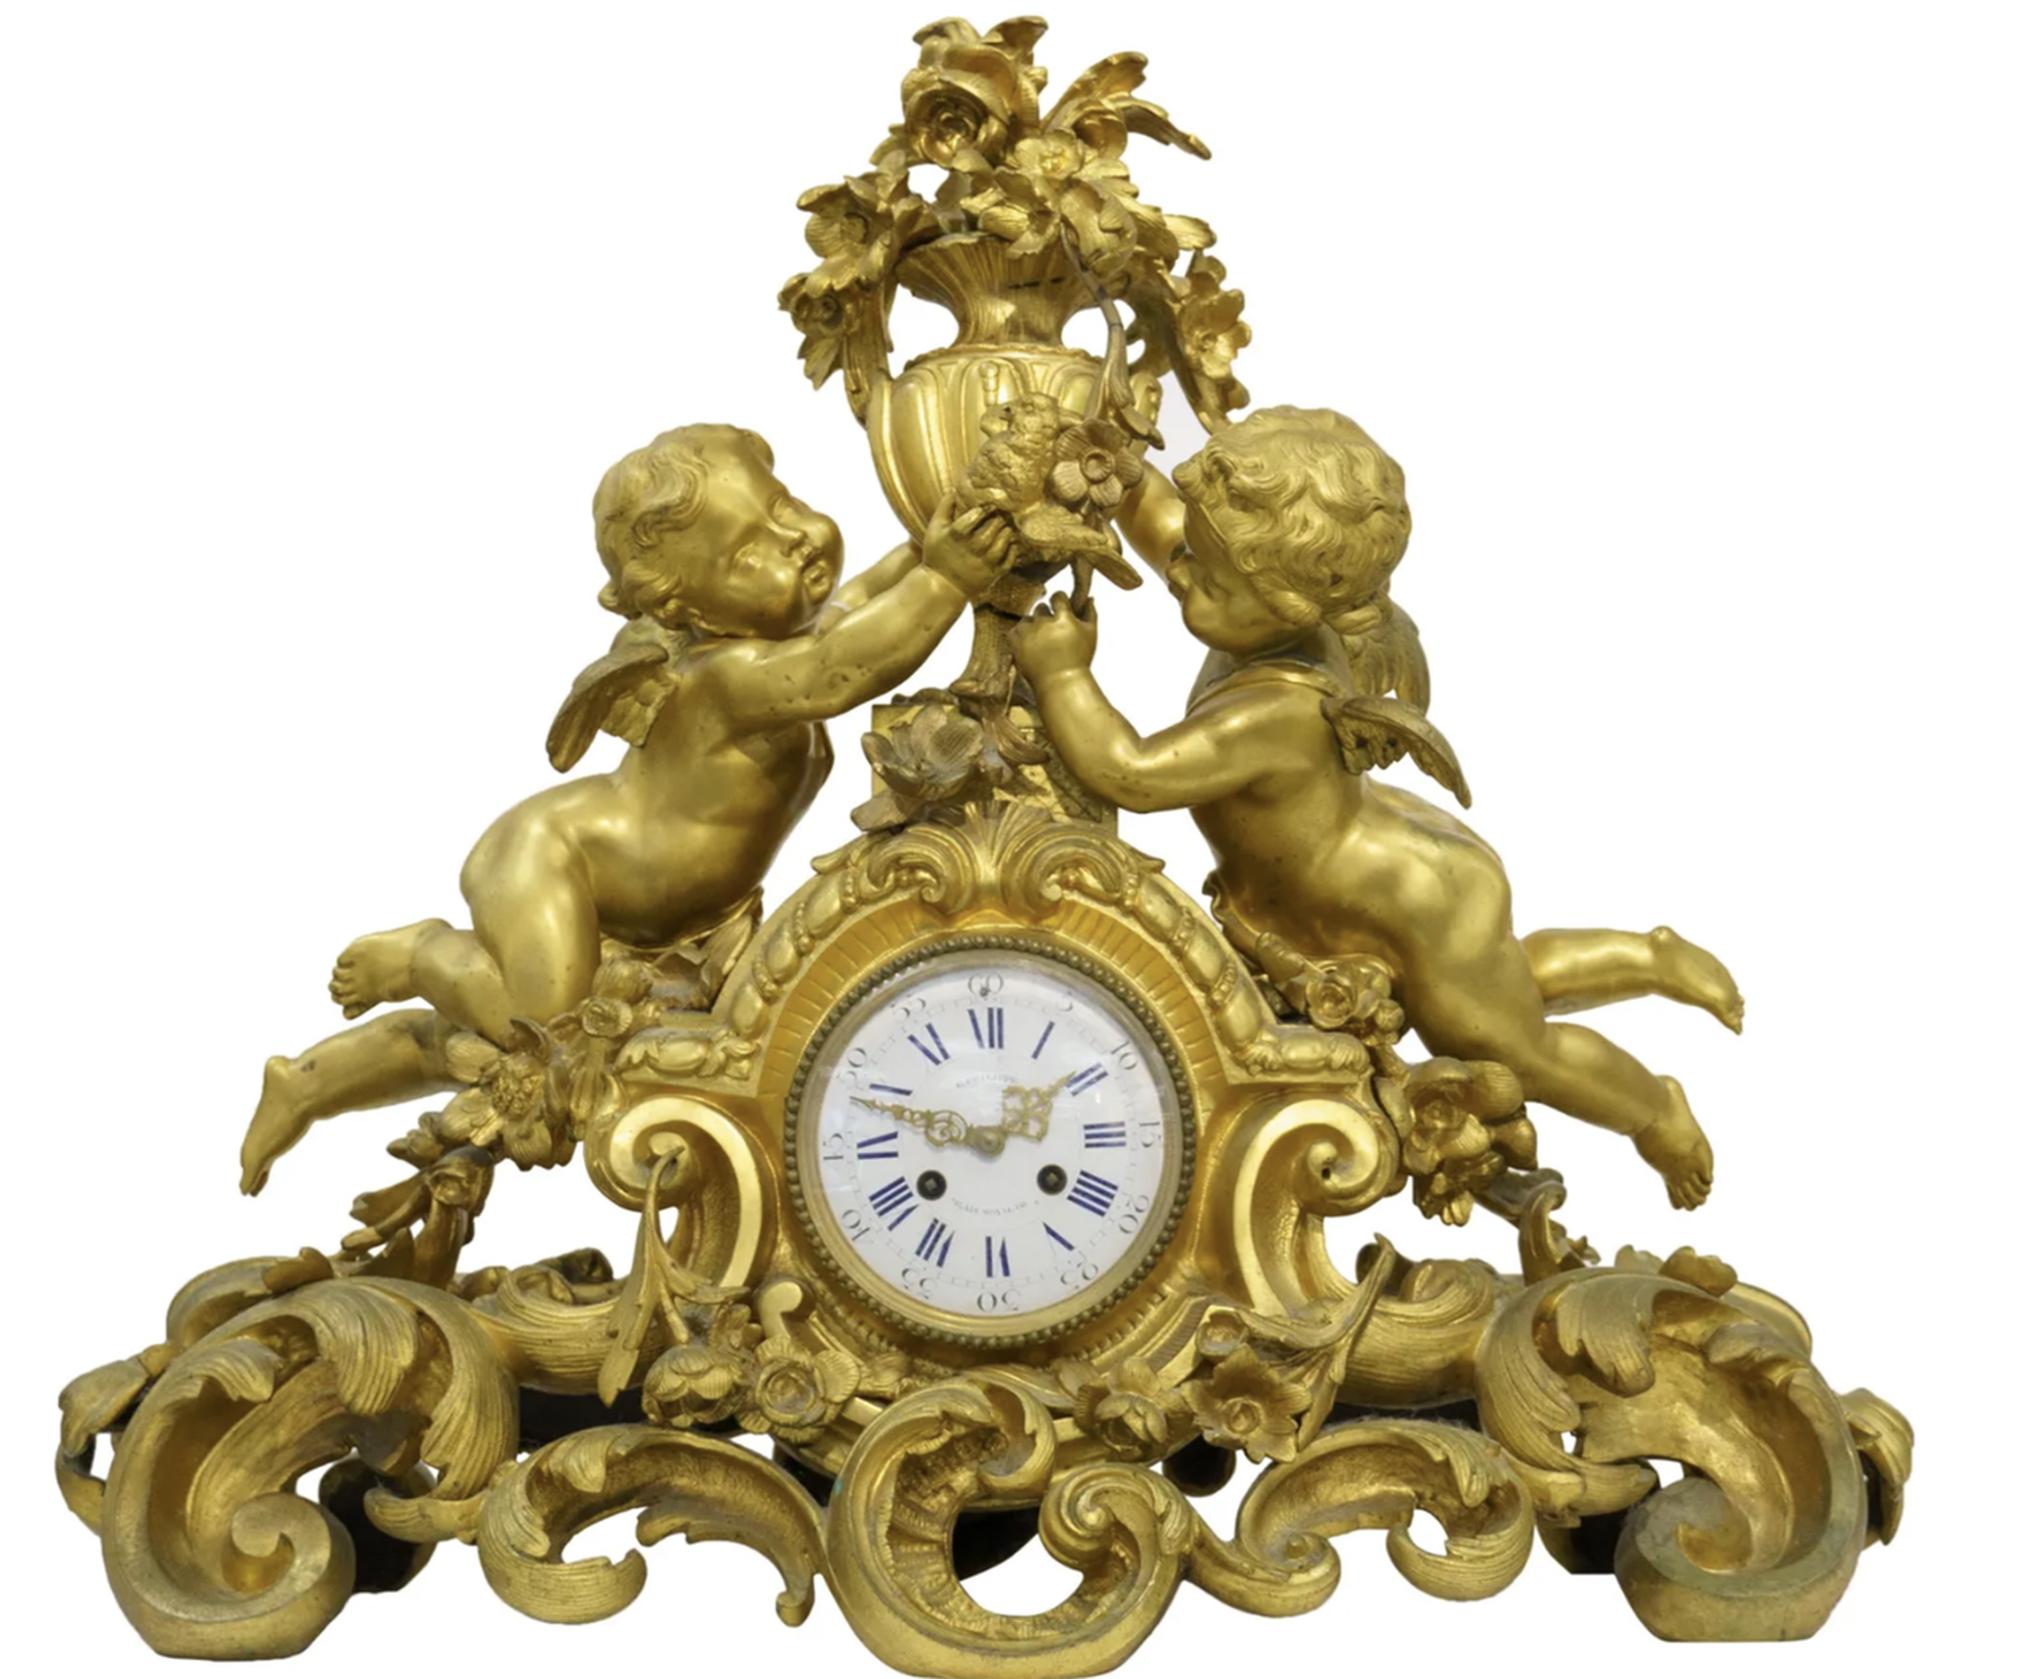 Ornate rocaille scrolled base with garland swags, centered the enamel white clock face with Roman and Arabic Numerals, the face with, G. Philippe, Palais Royal 66, flanked by two putto's holding a urn filled with flowers,

the mechanism stamped G.